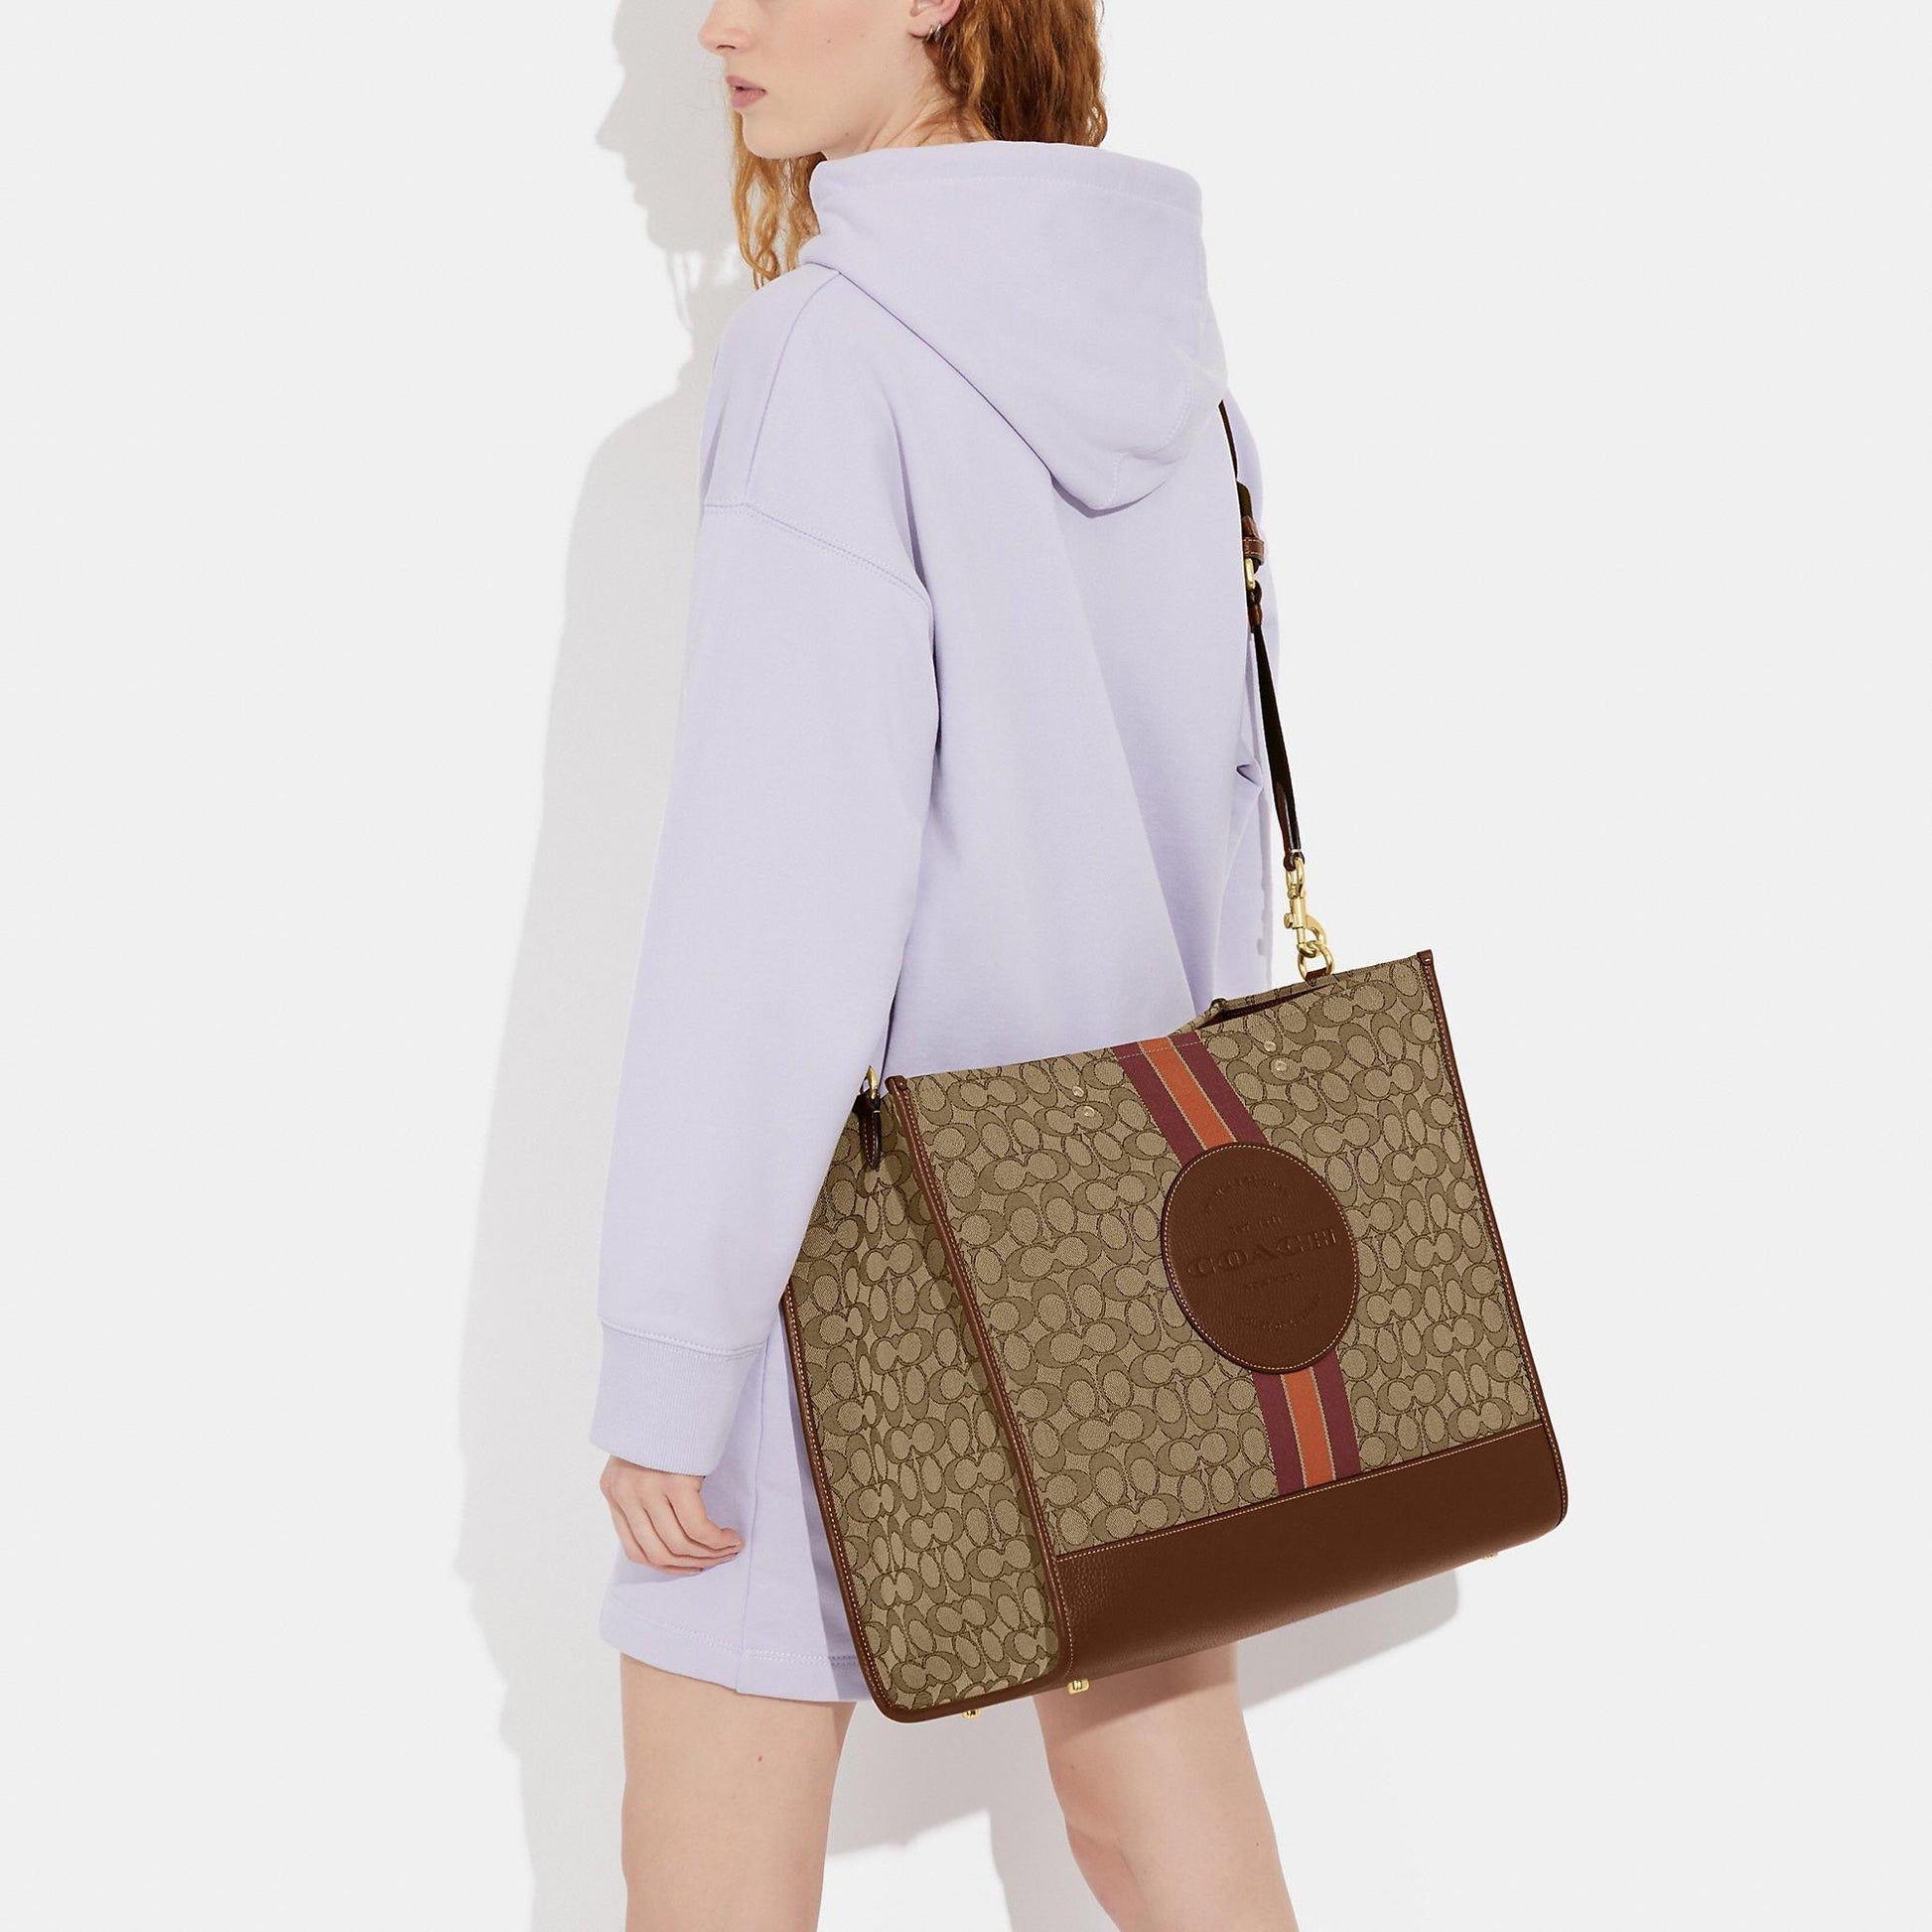 Coach Outlet Dempsey Tote 40 In Signature Jacquard With Stripe And Coach Patch - CADEAUME